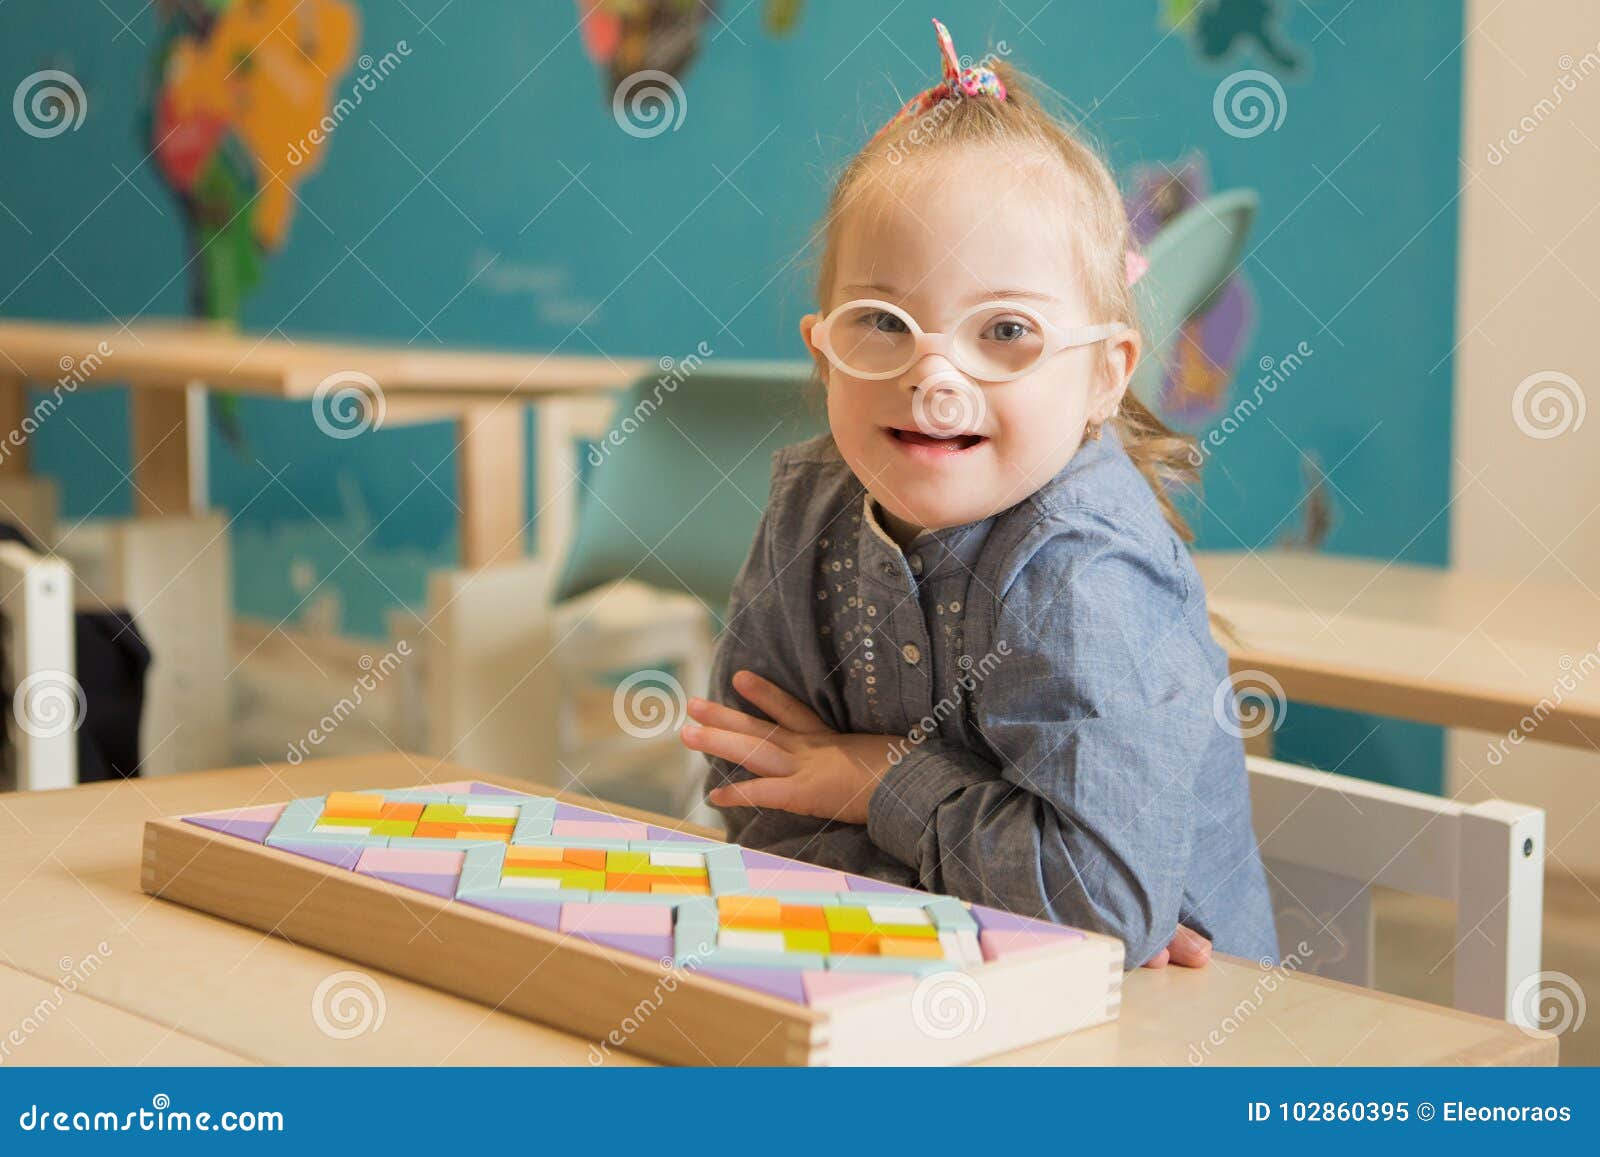 beautiful girl with down syndrome engaged in class